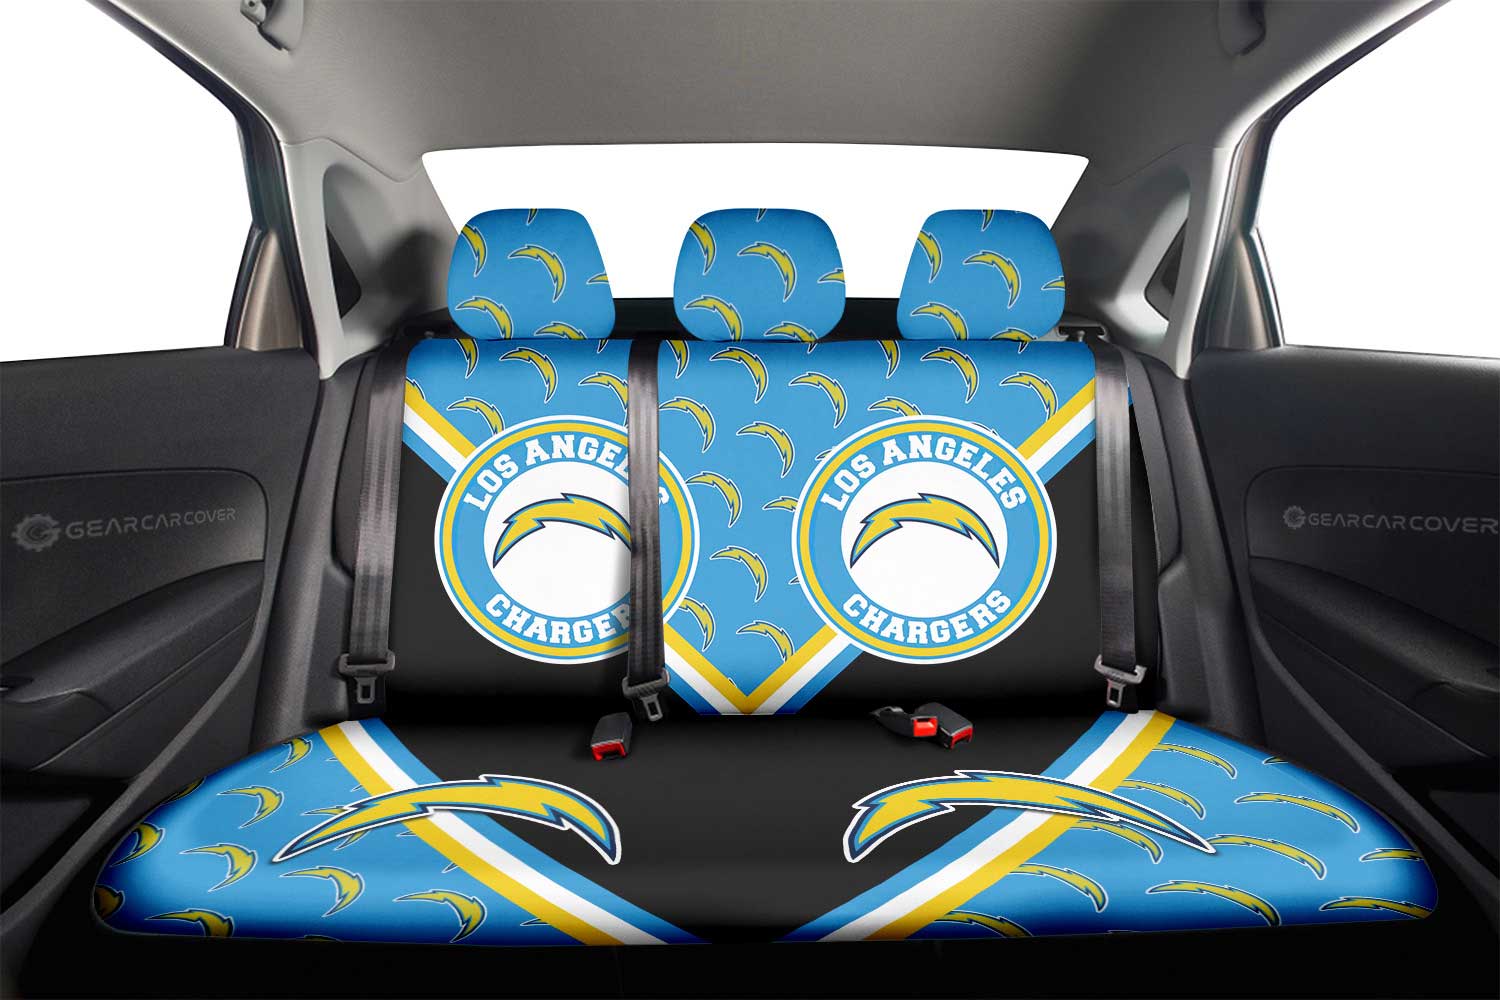 Los Angeles Chargers Car Back Seat Cover Custom Car Decorations For Fans - Gearcarcover - 2